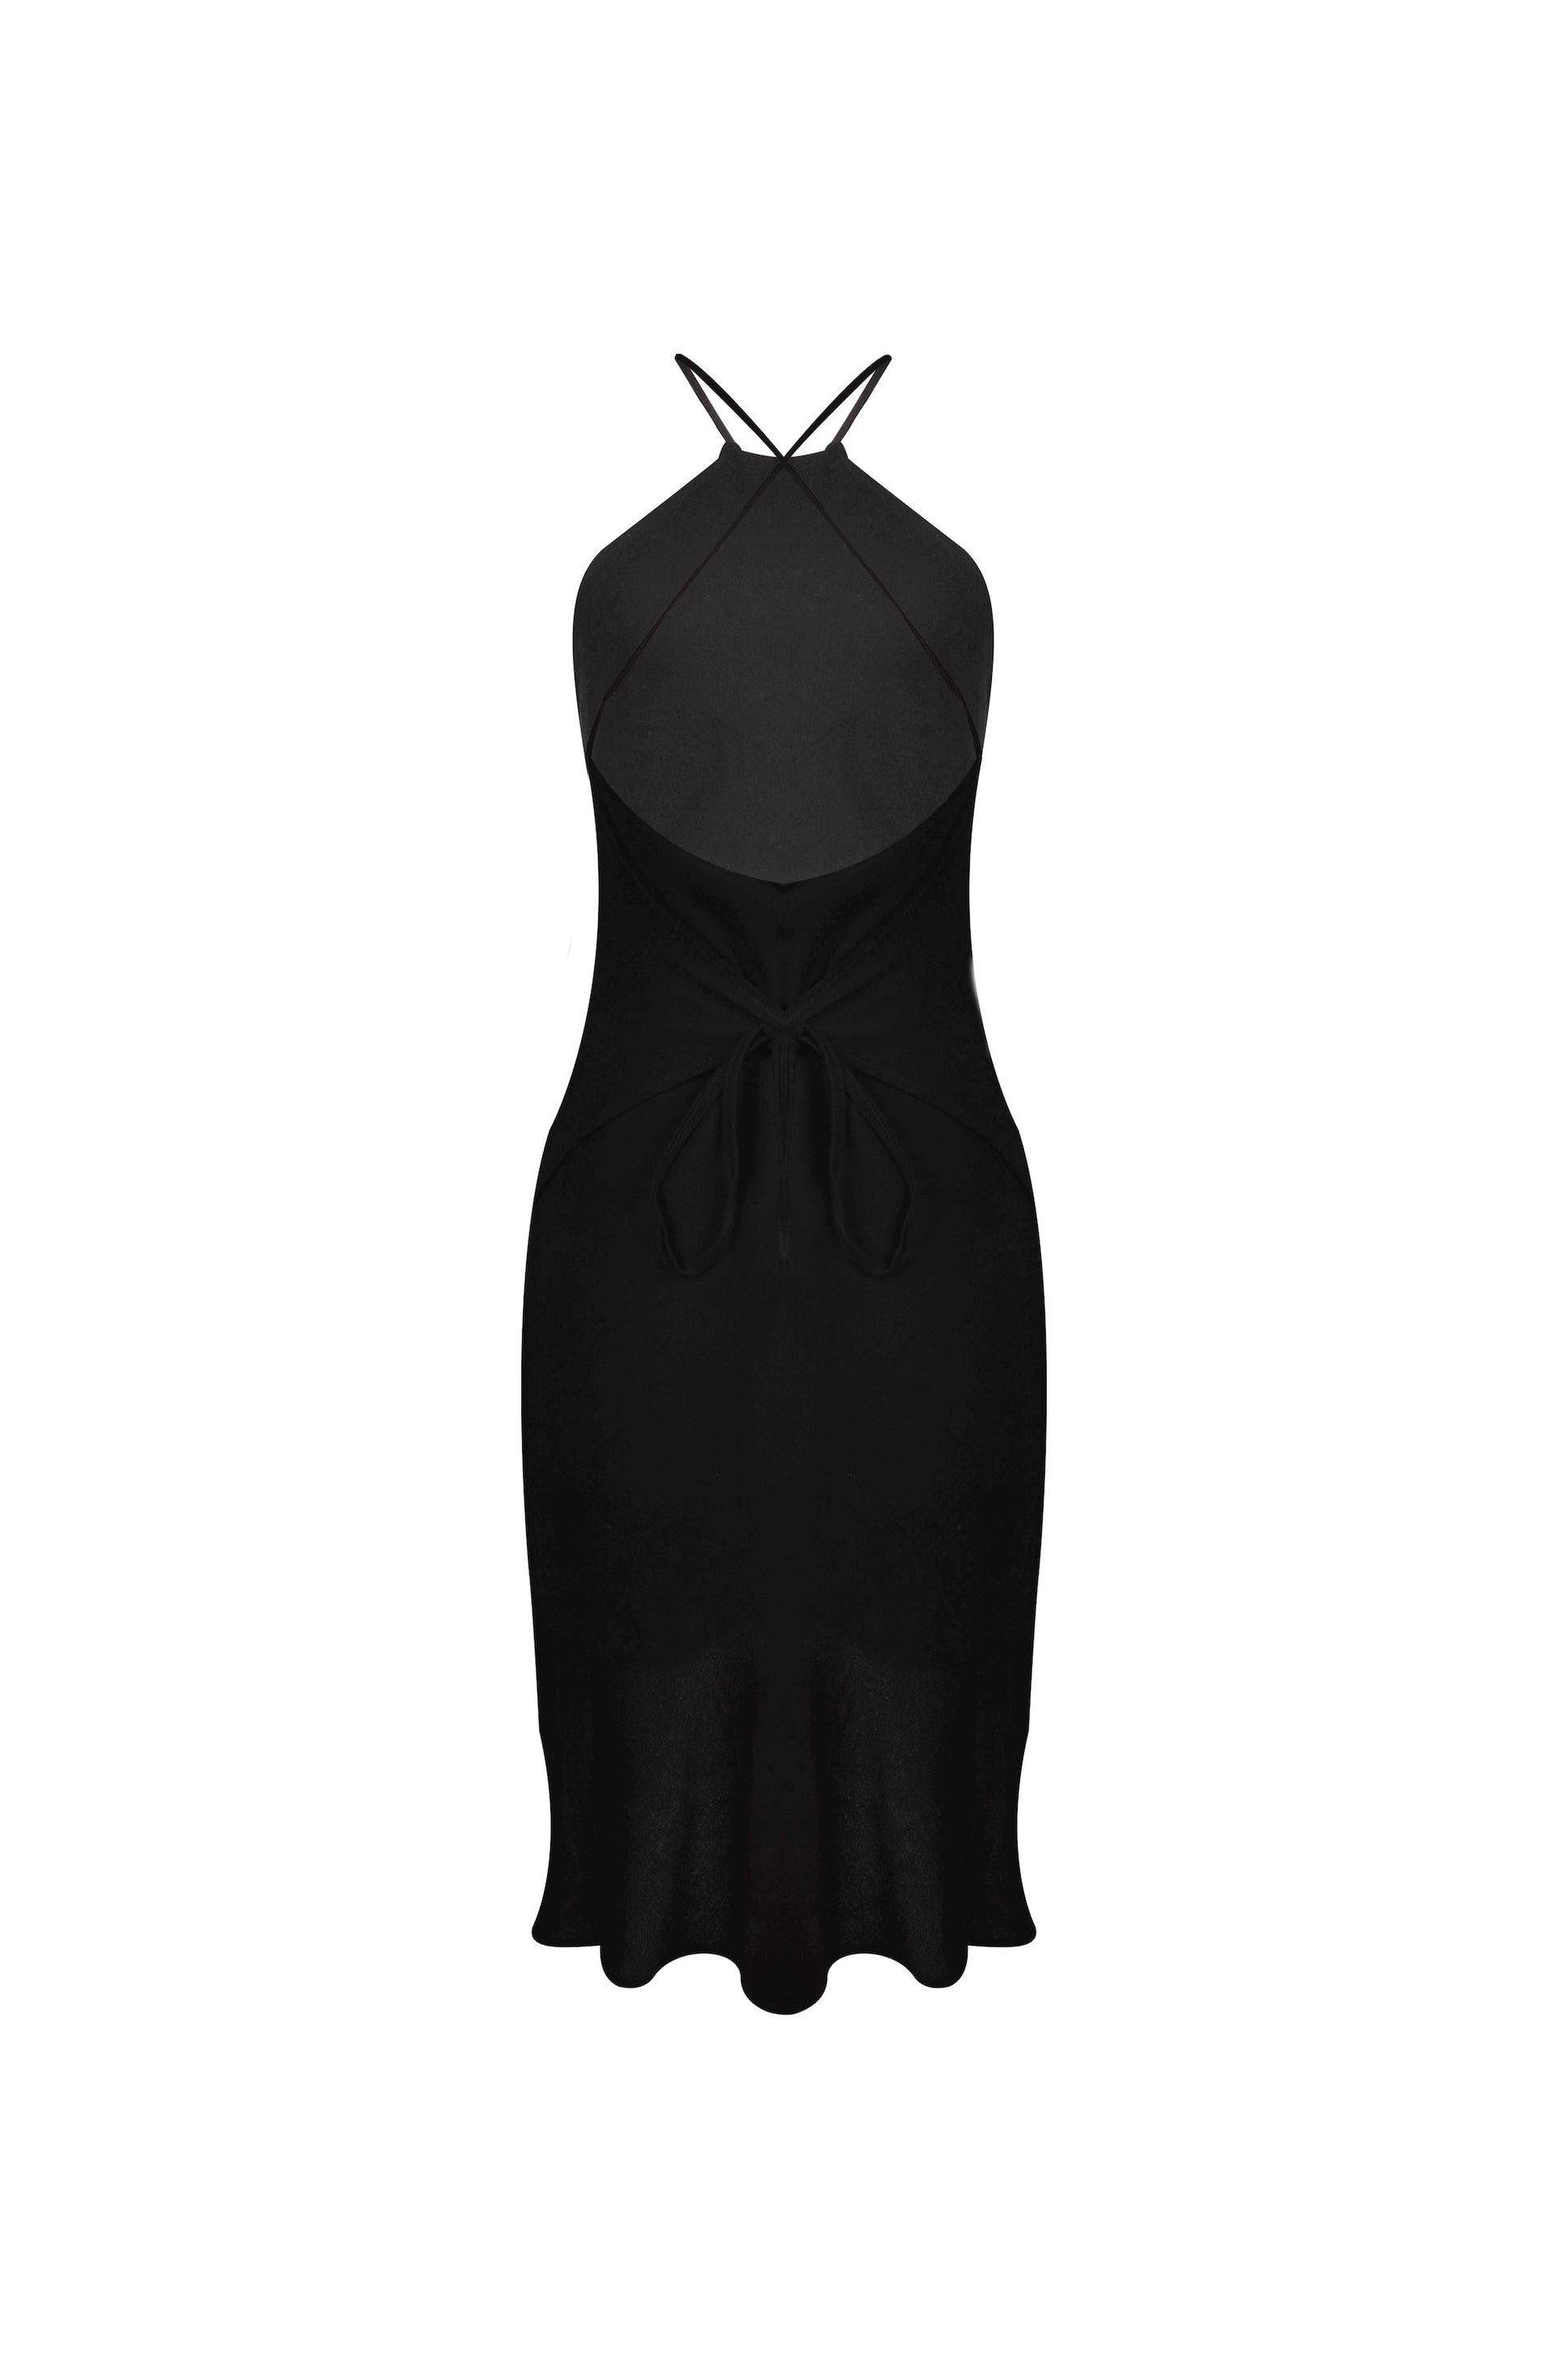 Paloma Dress Midnight - APPAREL THIS IS A LOVE SONG